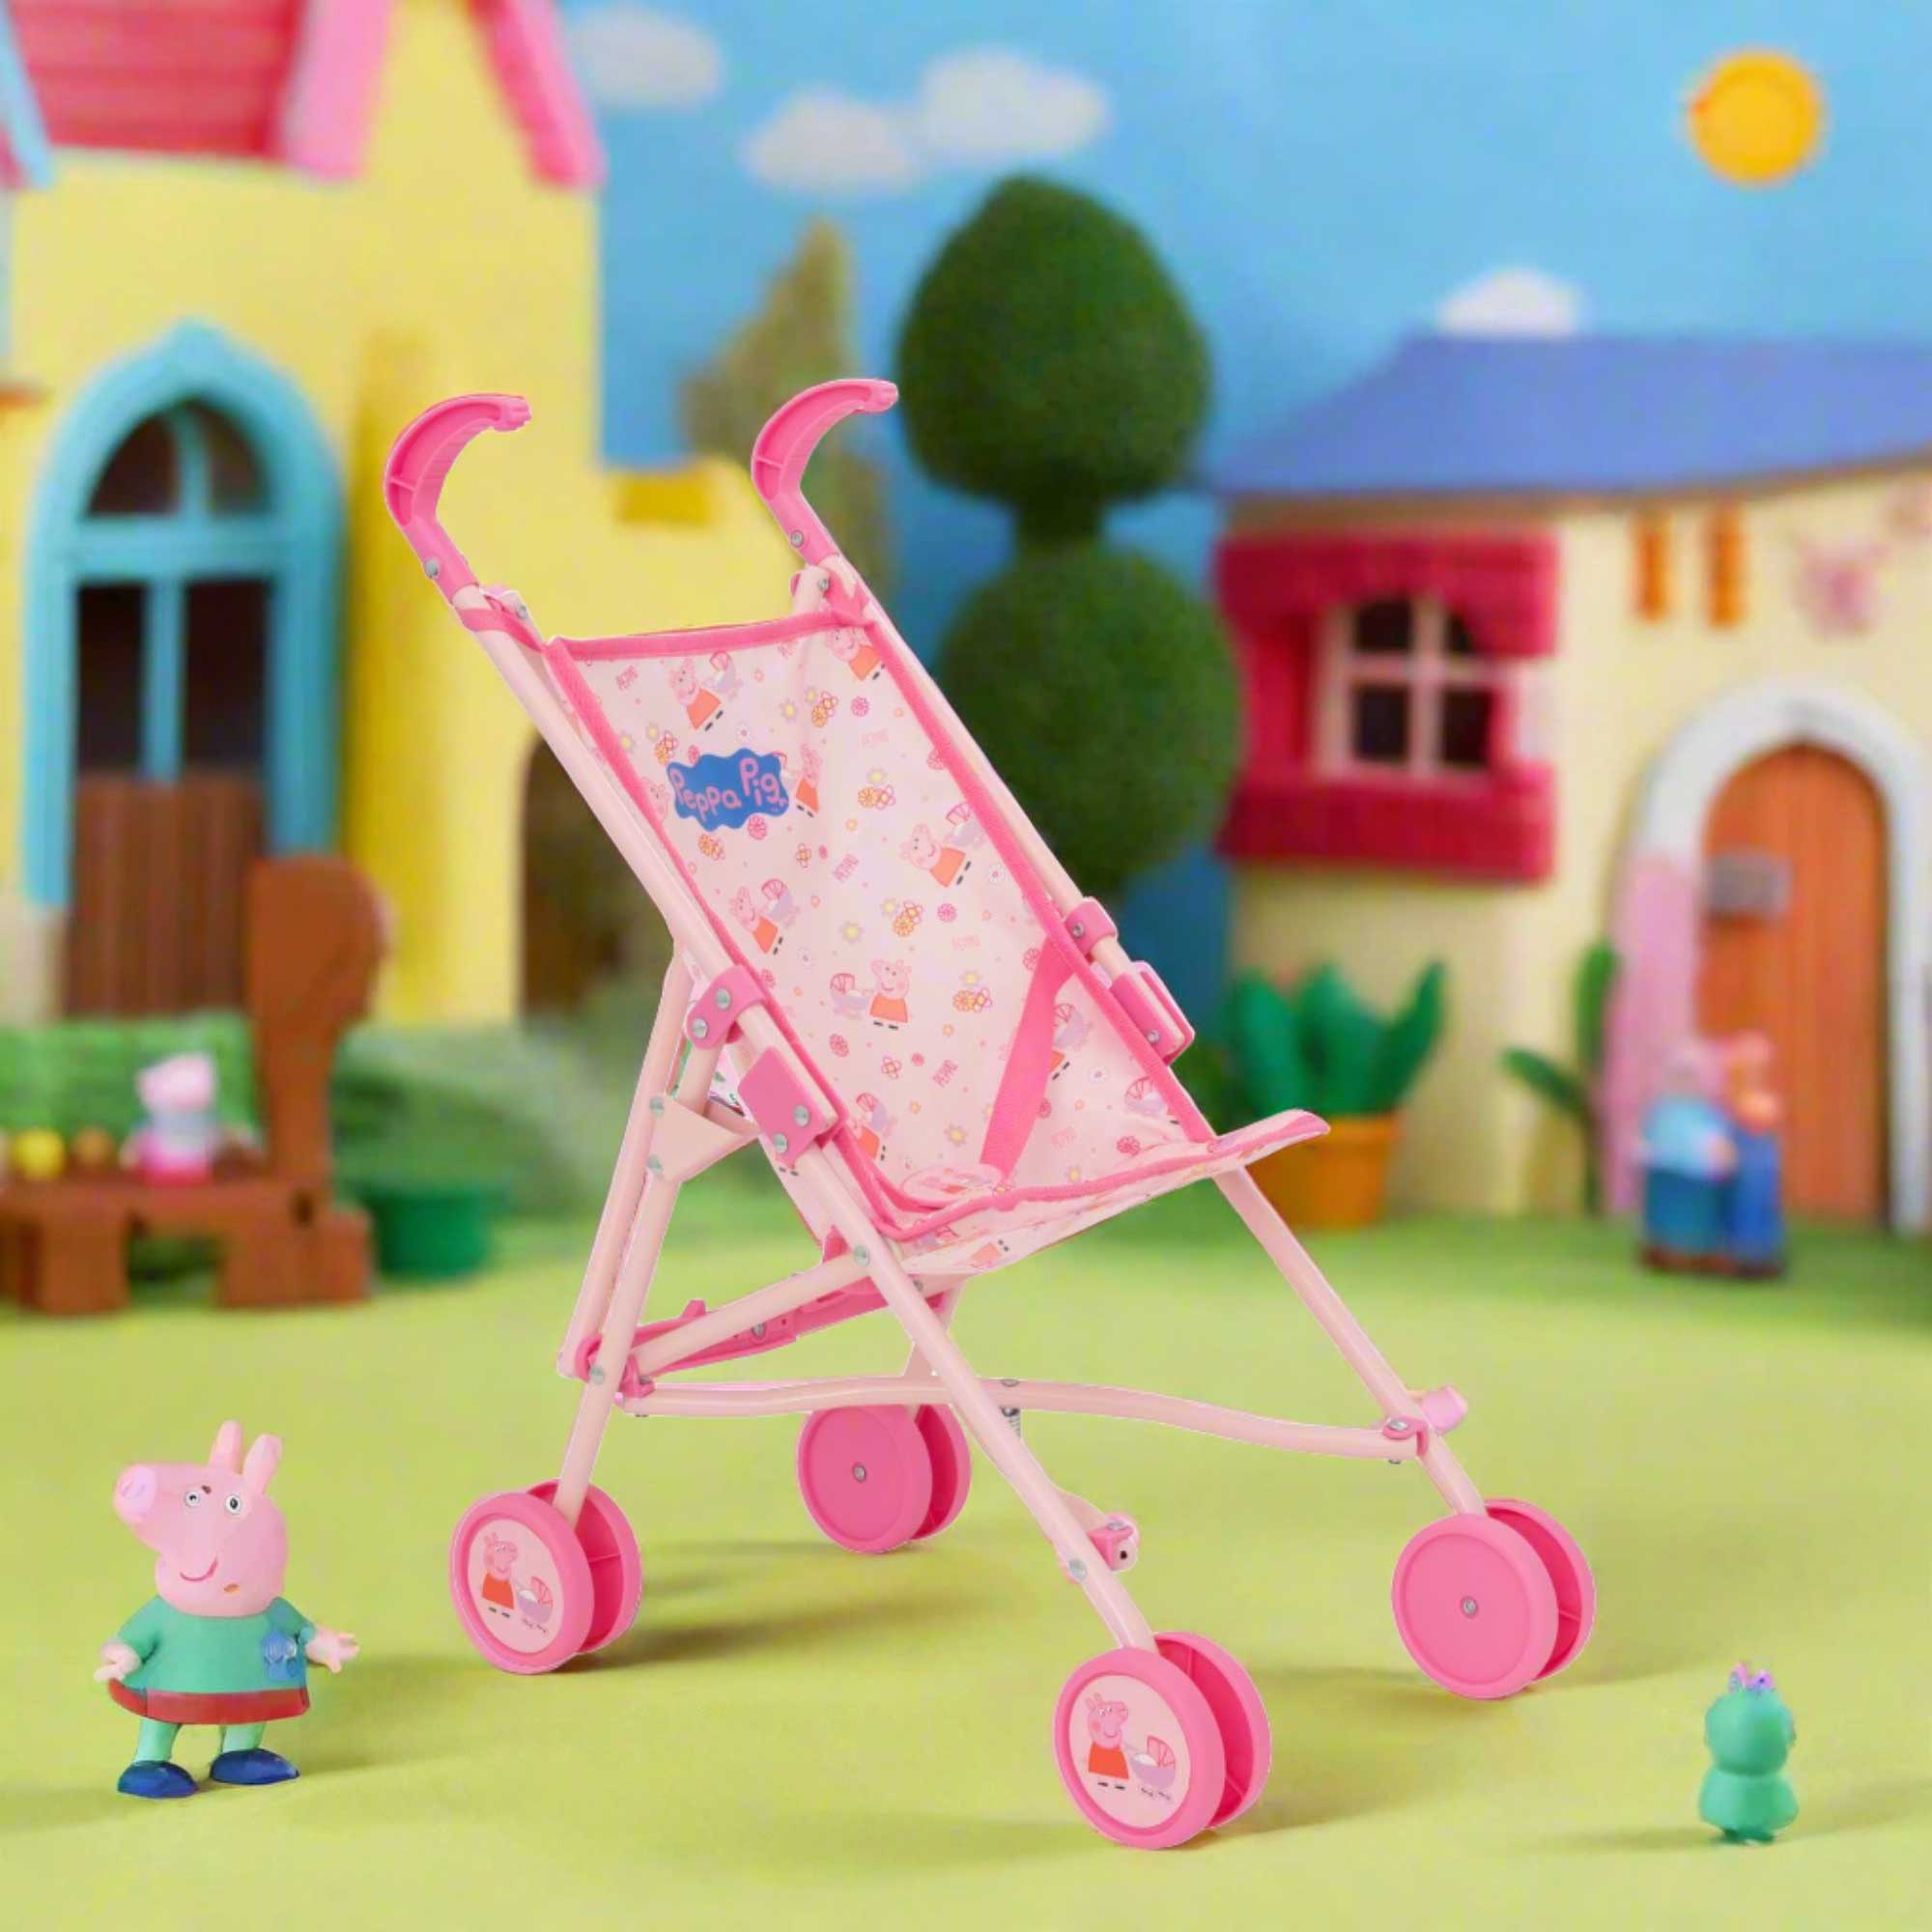 Peppa Pig Single Dolls Stroller, featuring a vibrant design with Peppa Pig-themed accents, ideal for children's imaginative play with their favourite dolls